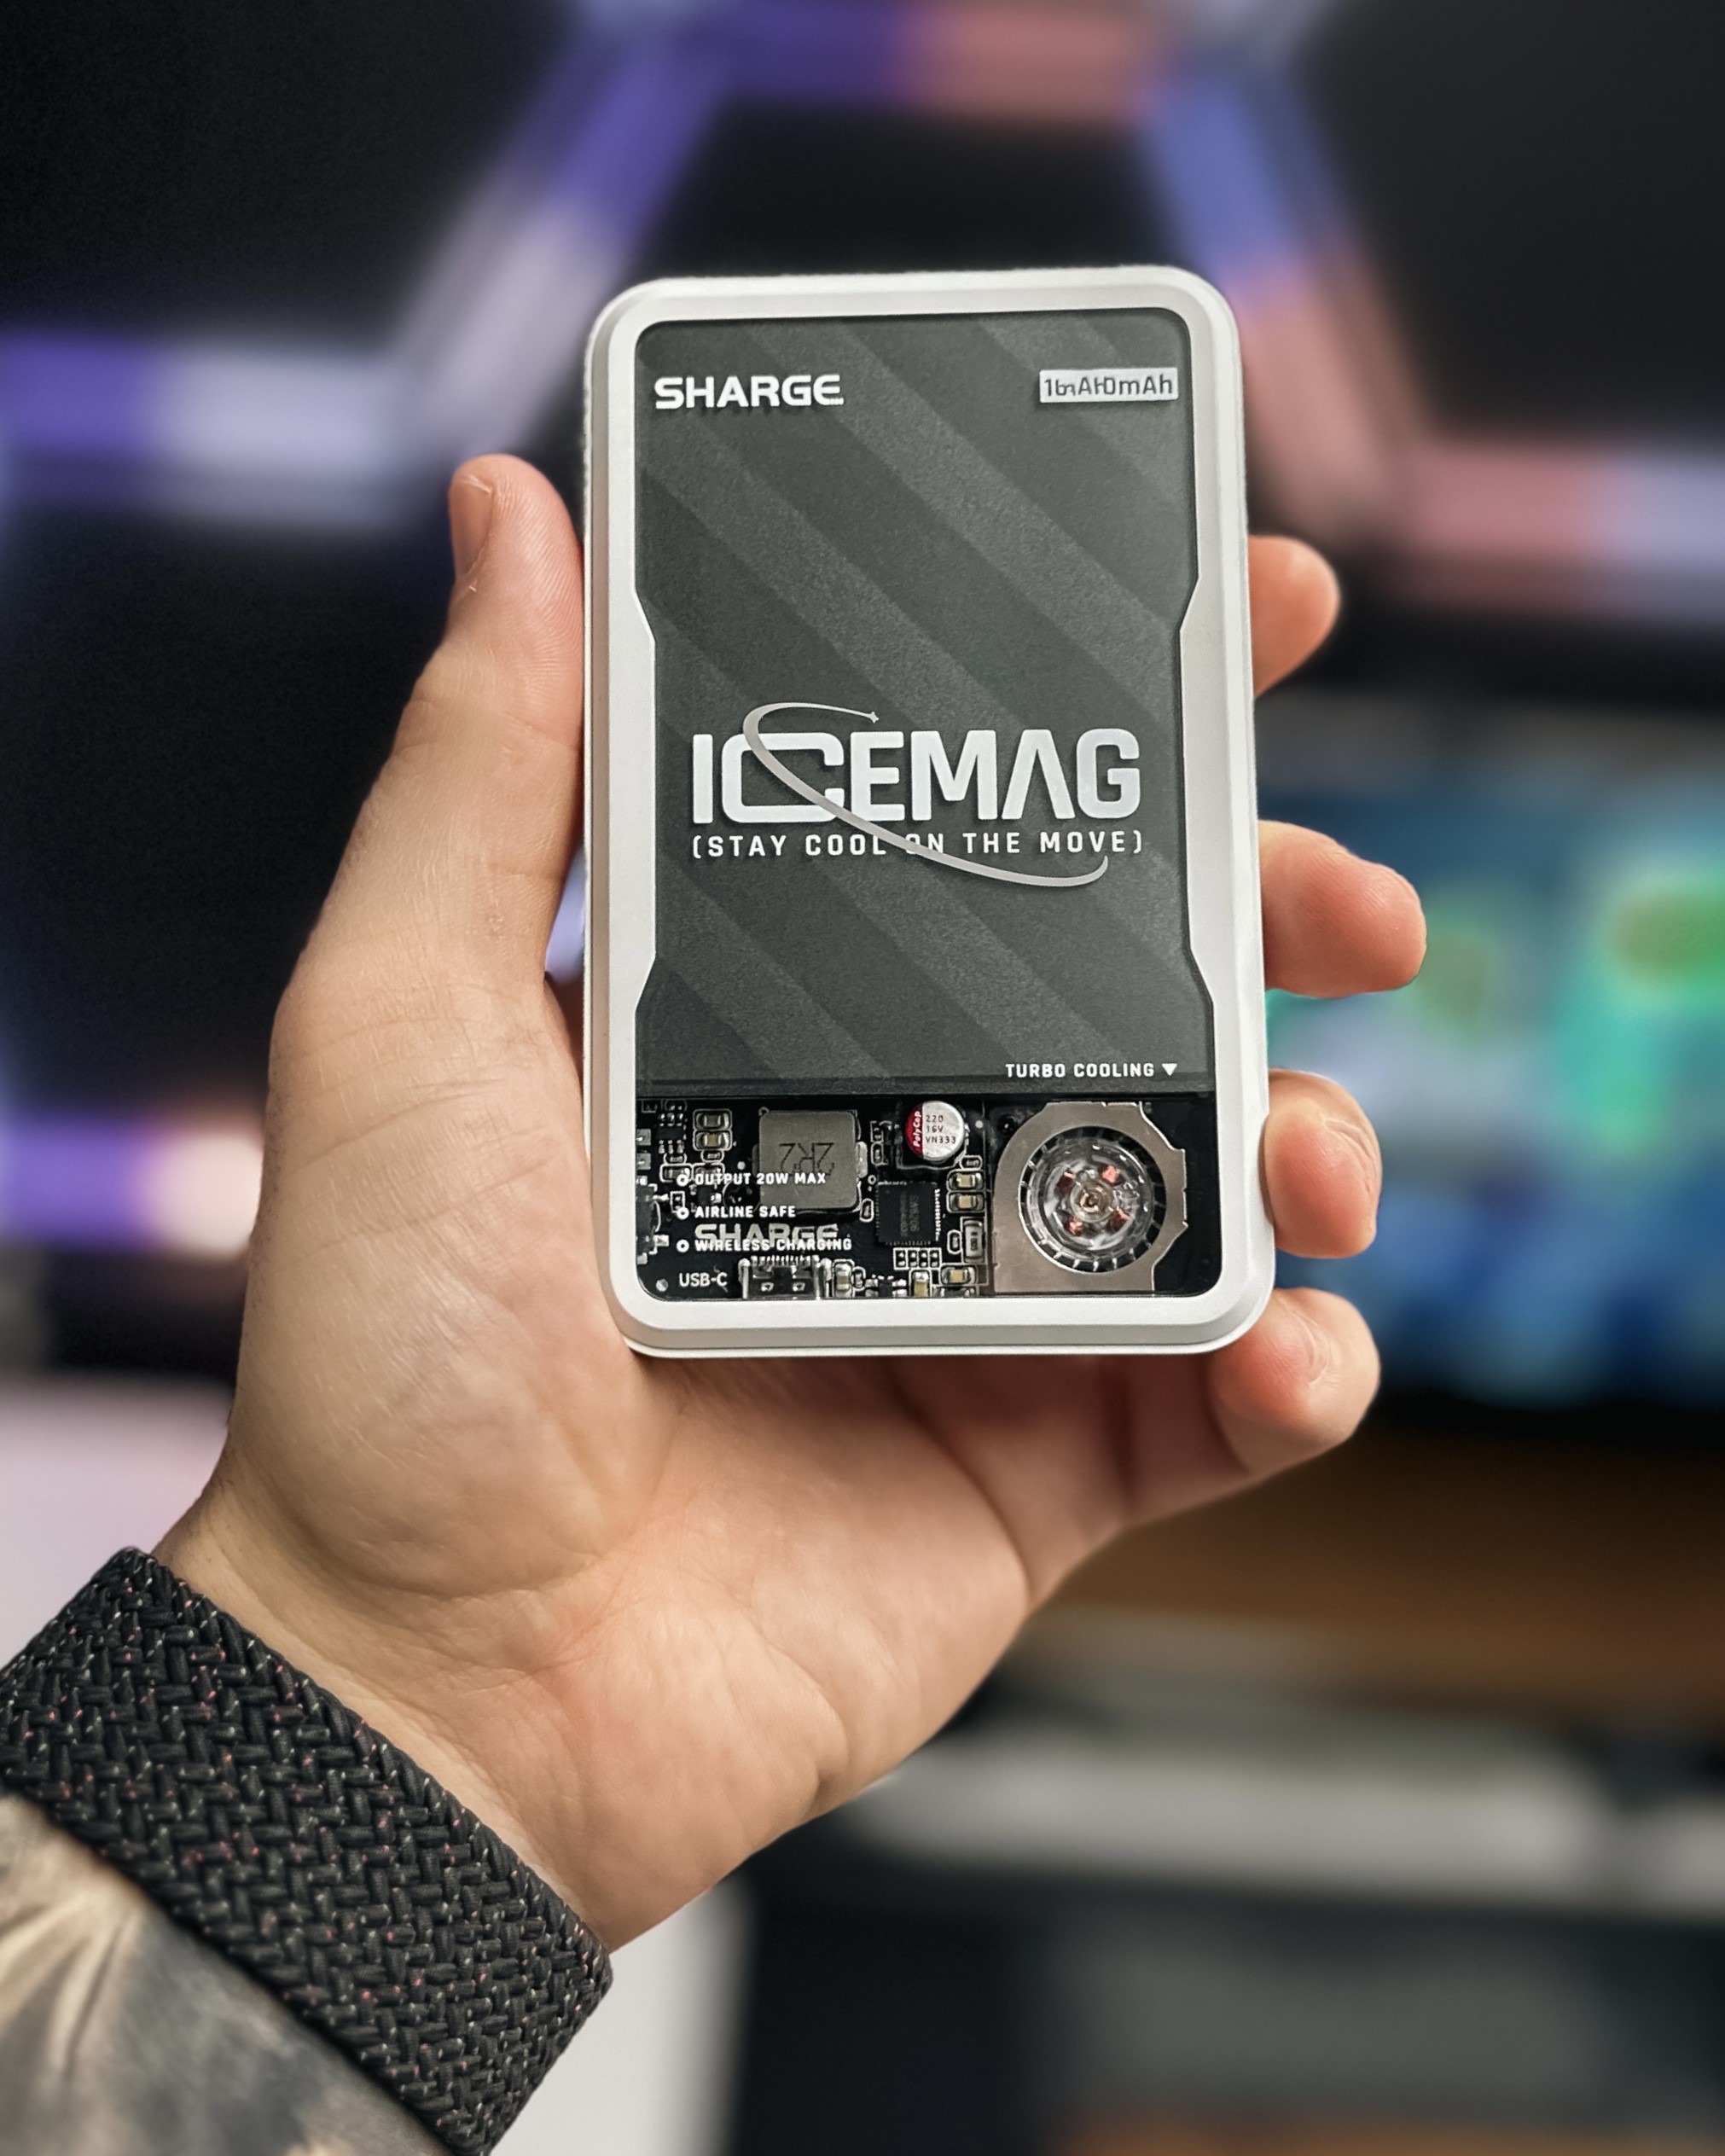 SHARGE on X: Compact. Powerful. Stay connected anywhere. ICEMAG